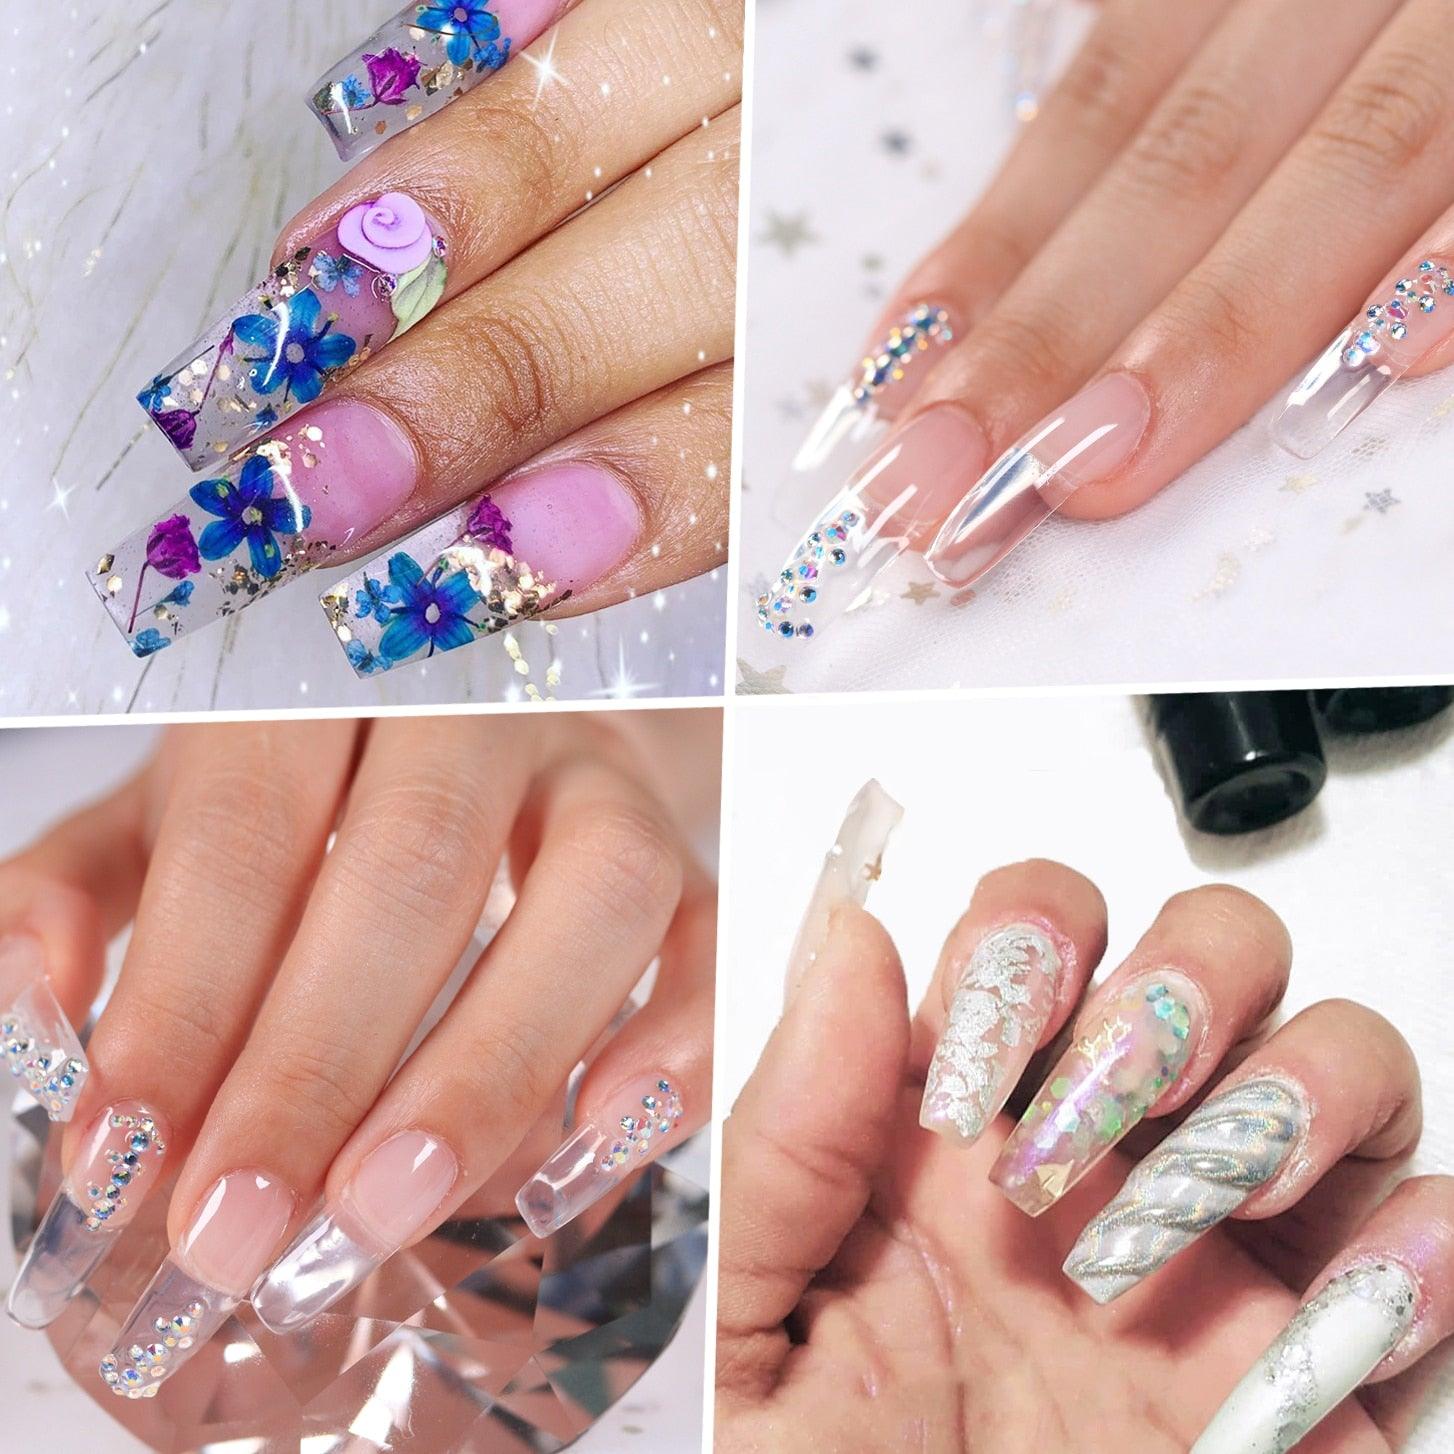 12 Trending Nail Designs You Should Try At Least Once! - FunNow｜生活玩樂誌